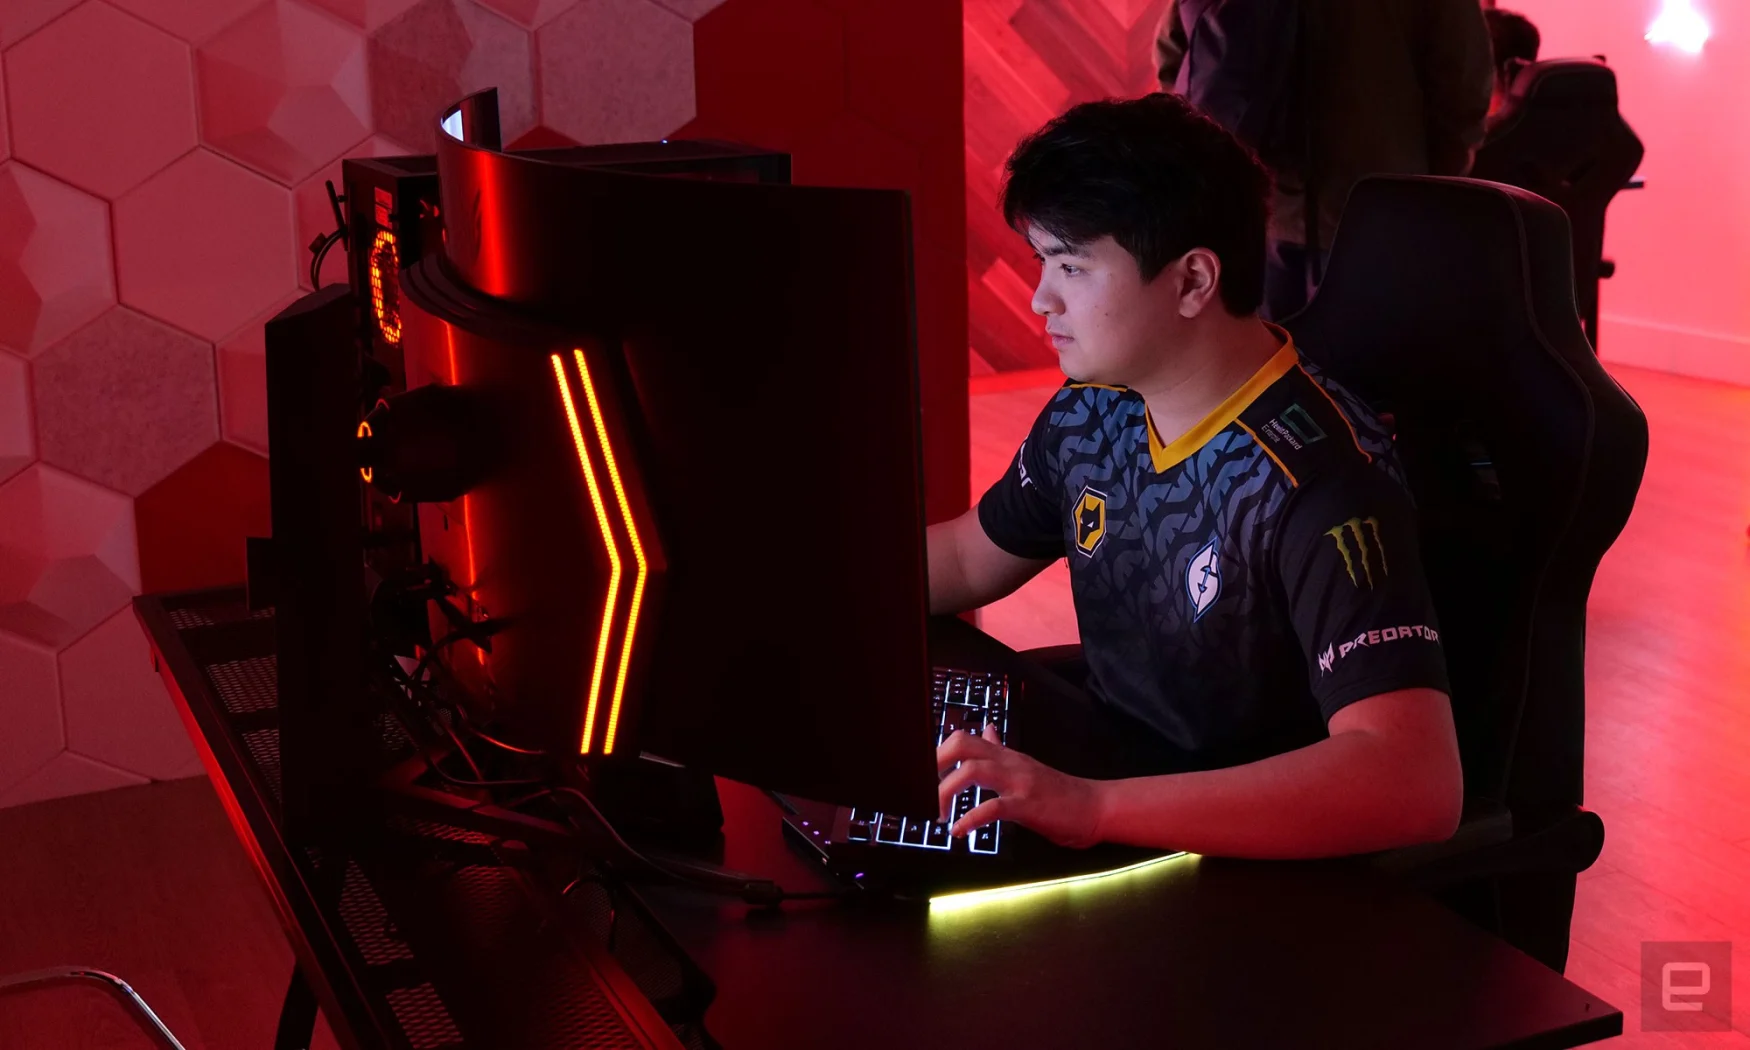 To test out its new UltraGear gaming monitor, LG showcased professional Valorant players Com (pictured here) and Jawgemo from Evil Geniuses.